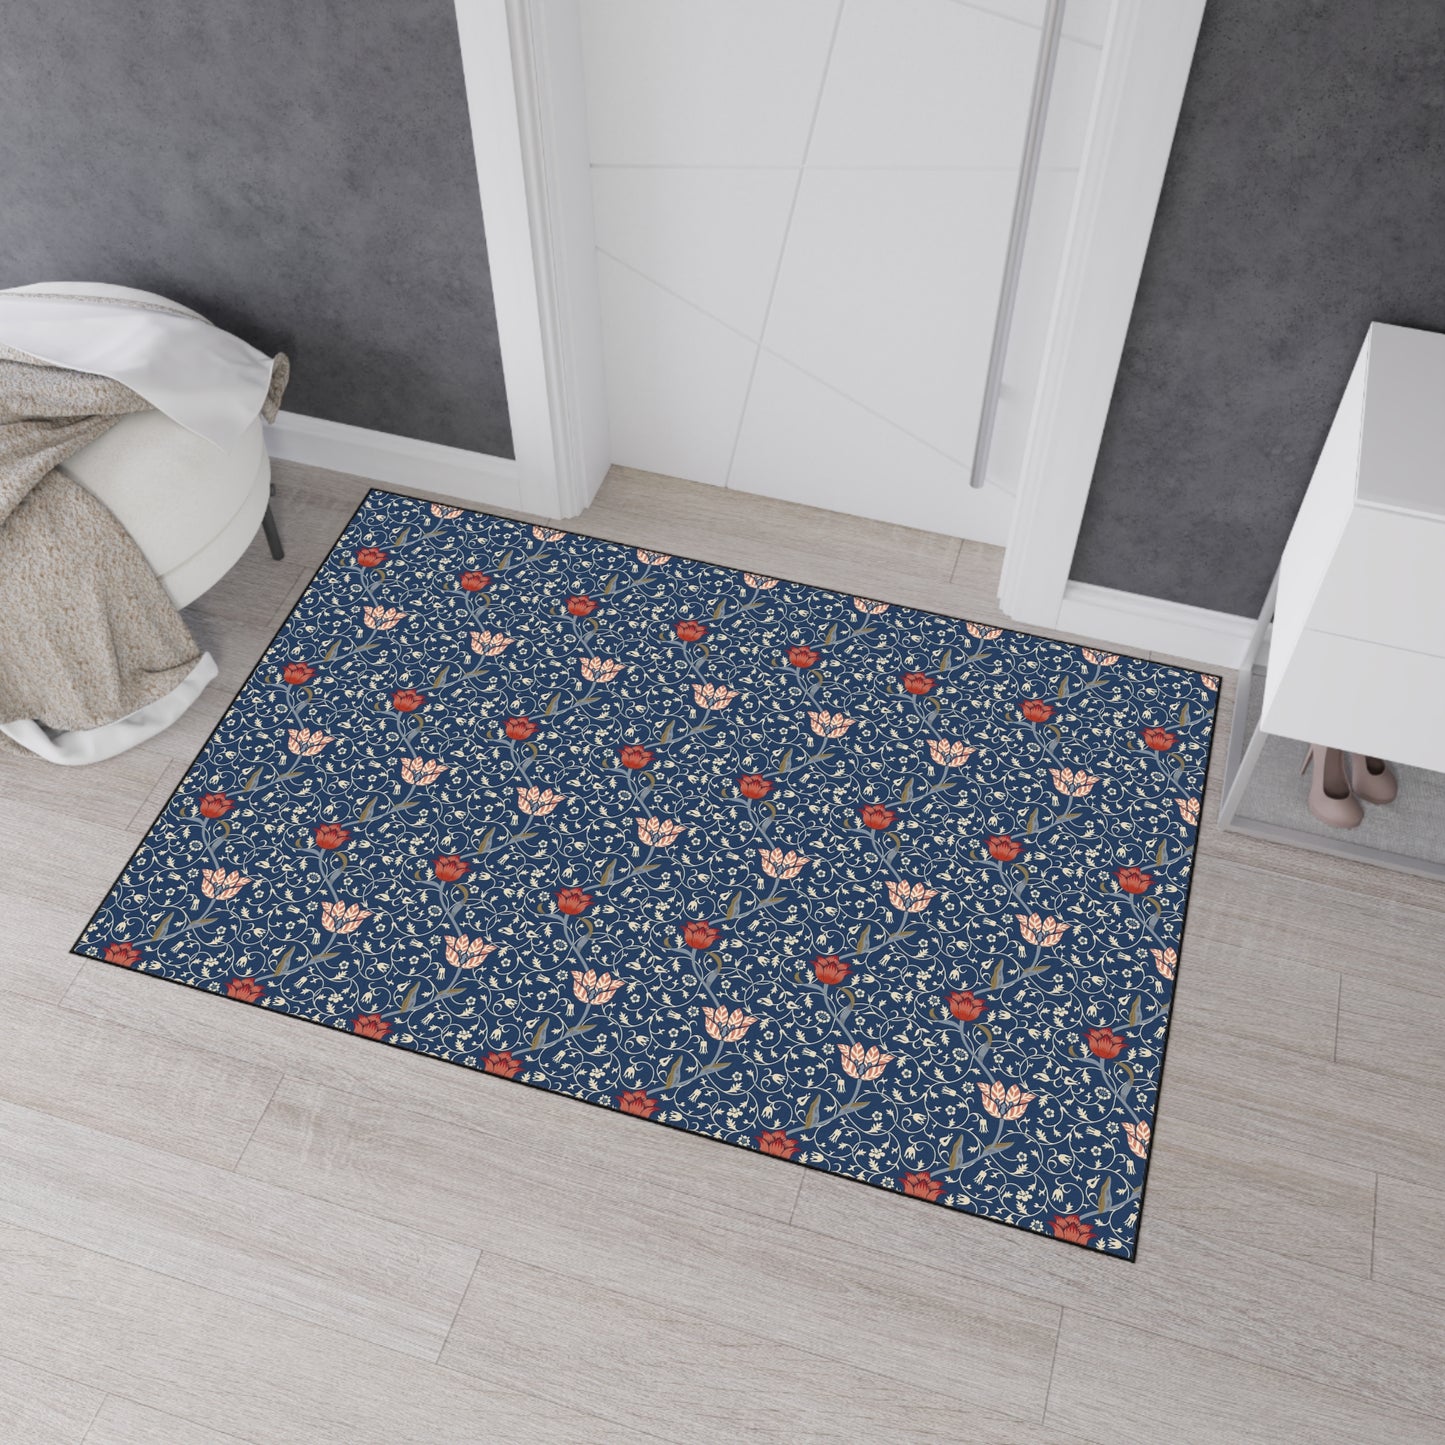 william-morris-co-heavy-duty-floor-mat-medway-collection-9